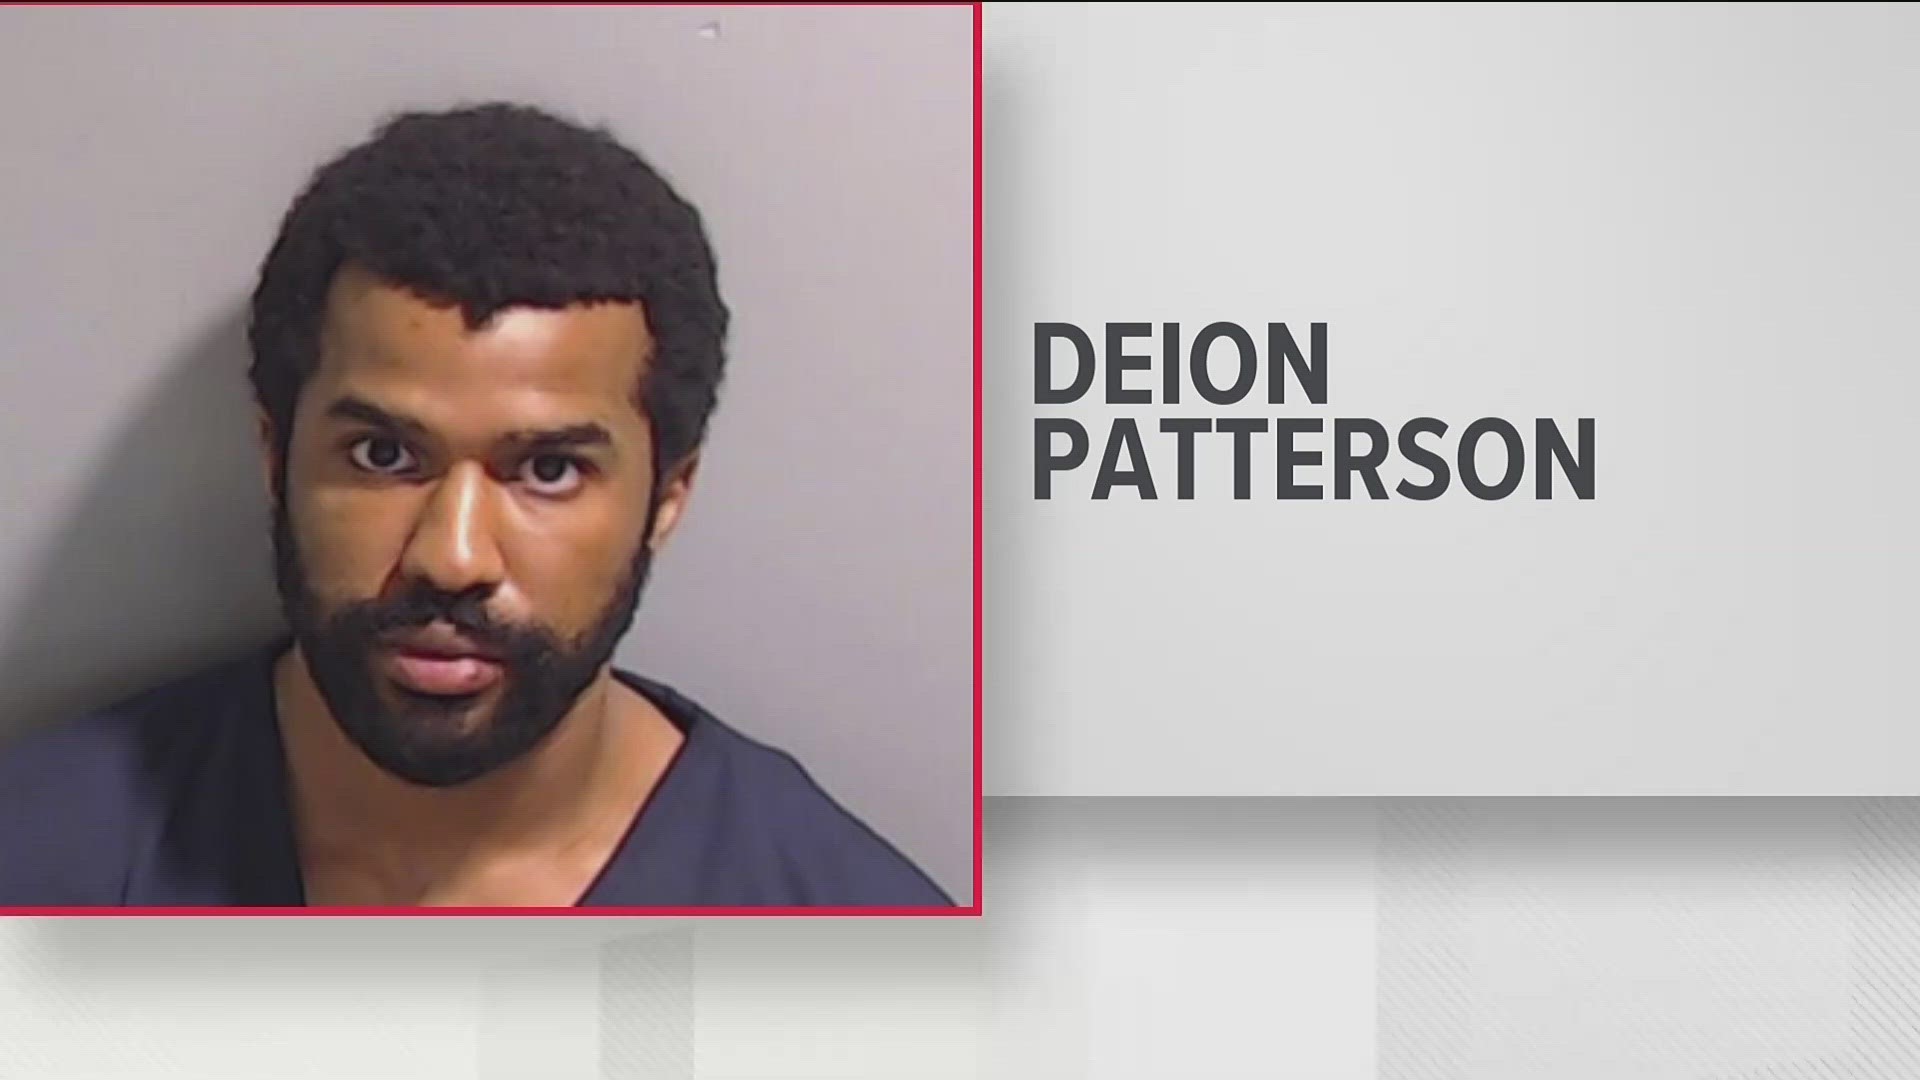 11Alive could not confirm if Deion Patterson was already taking Ativan.